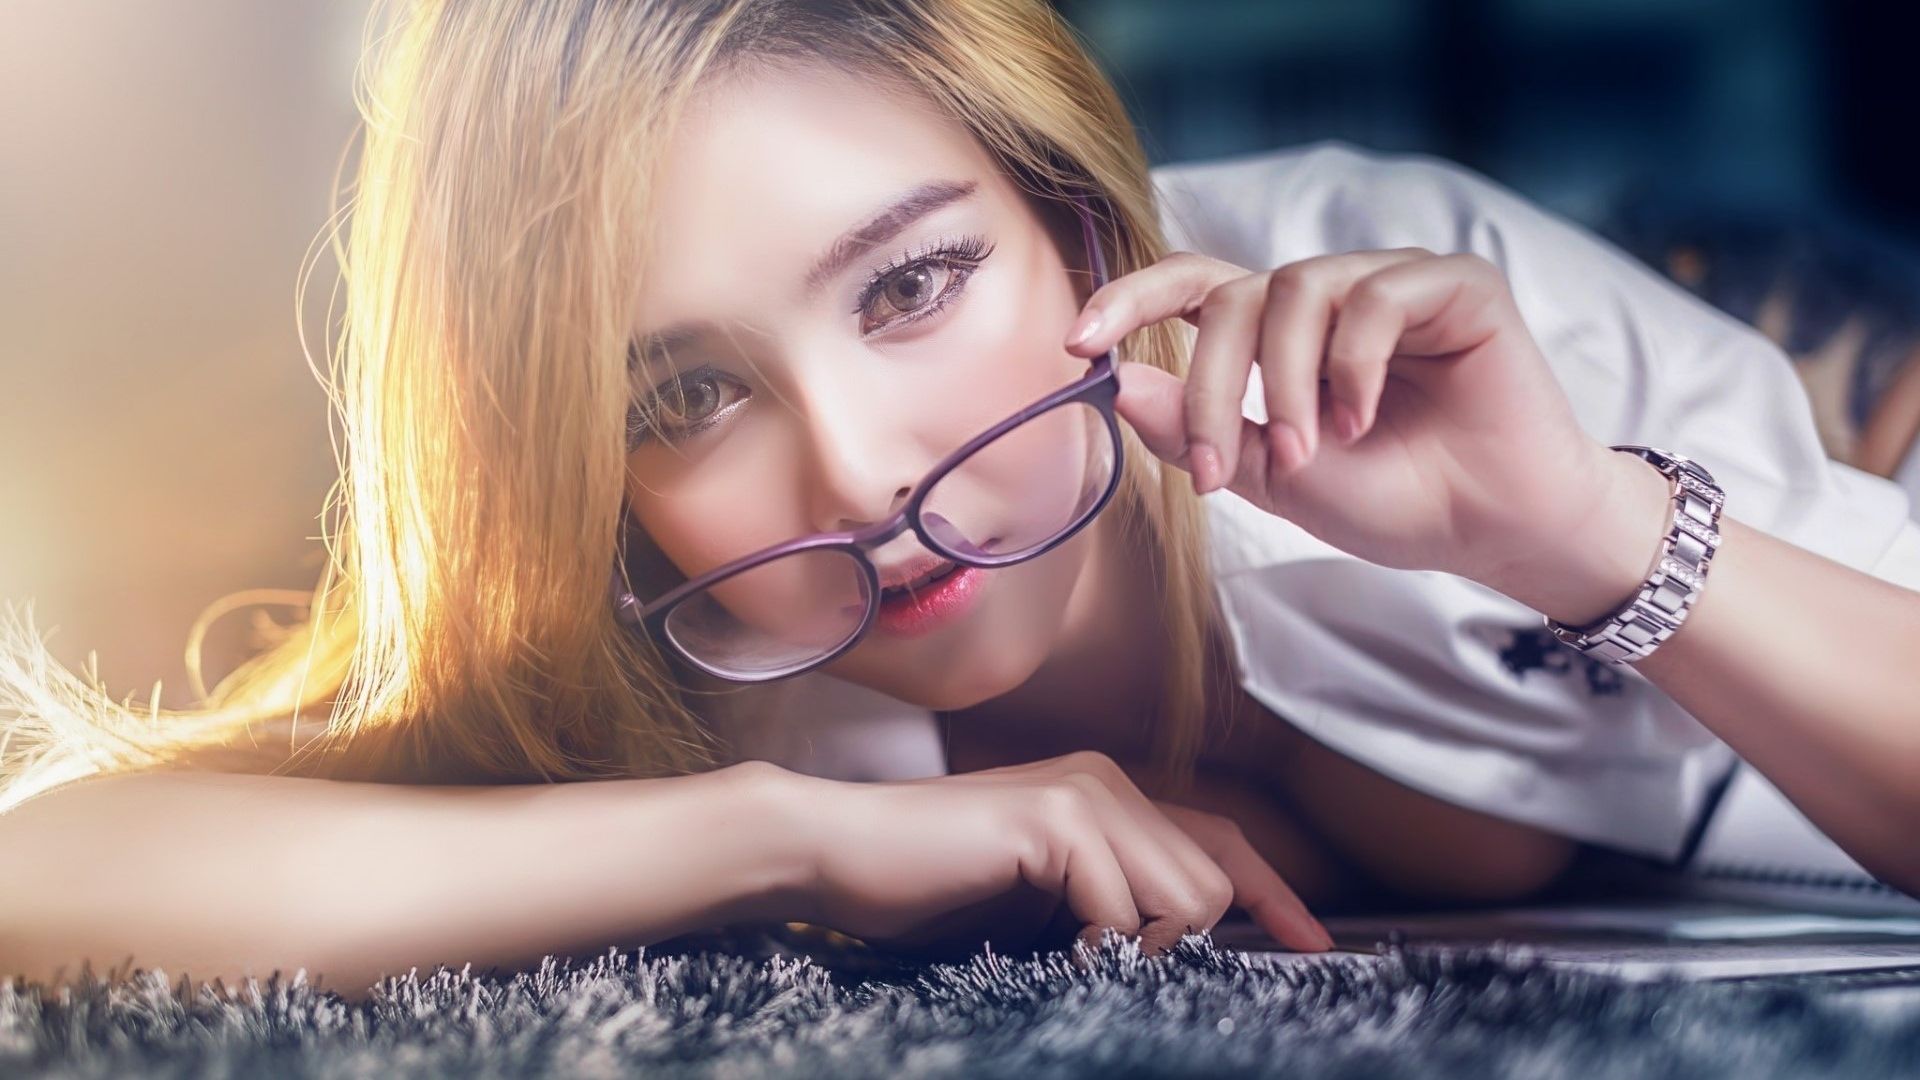 Chinese Girls With Glasses Wallpapers